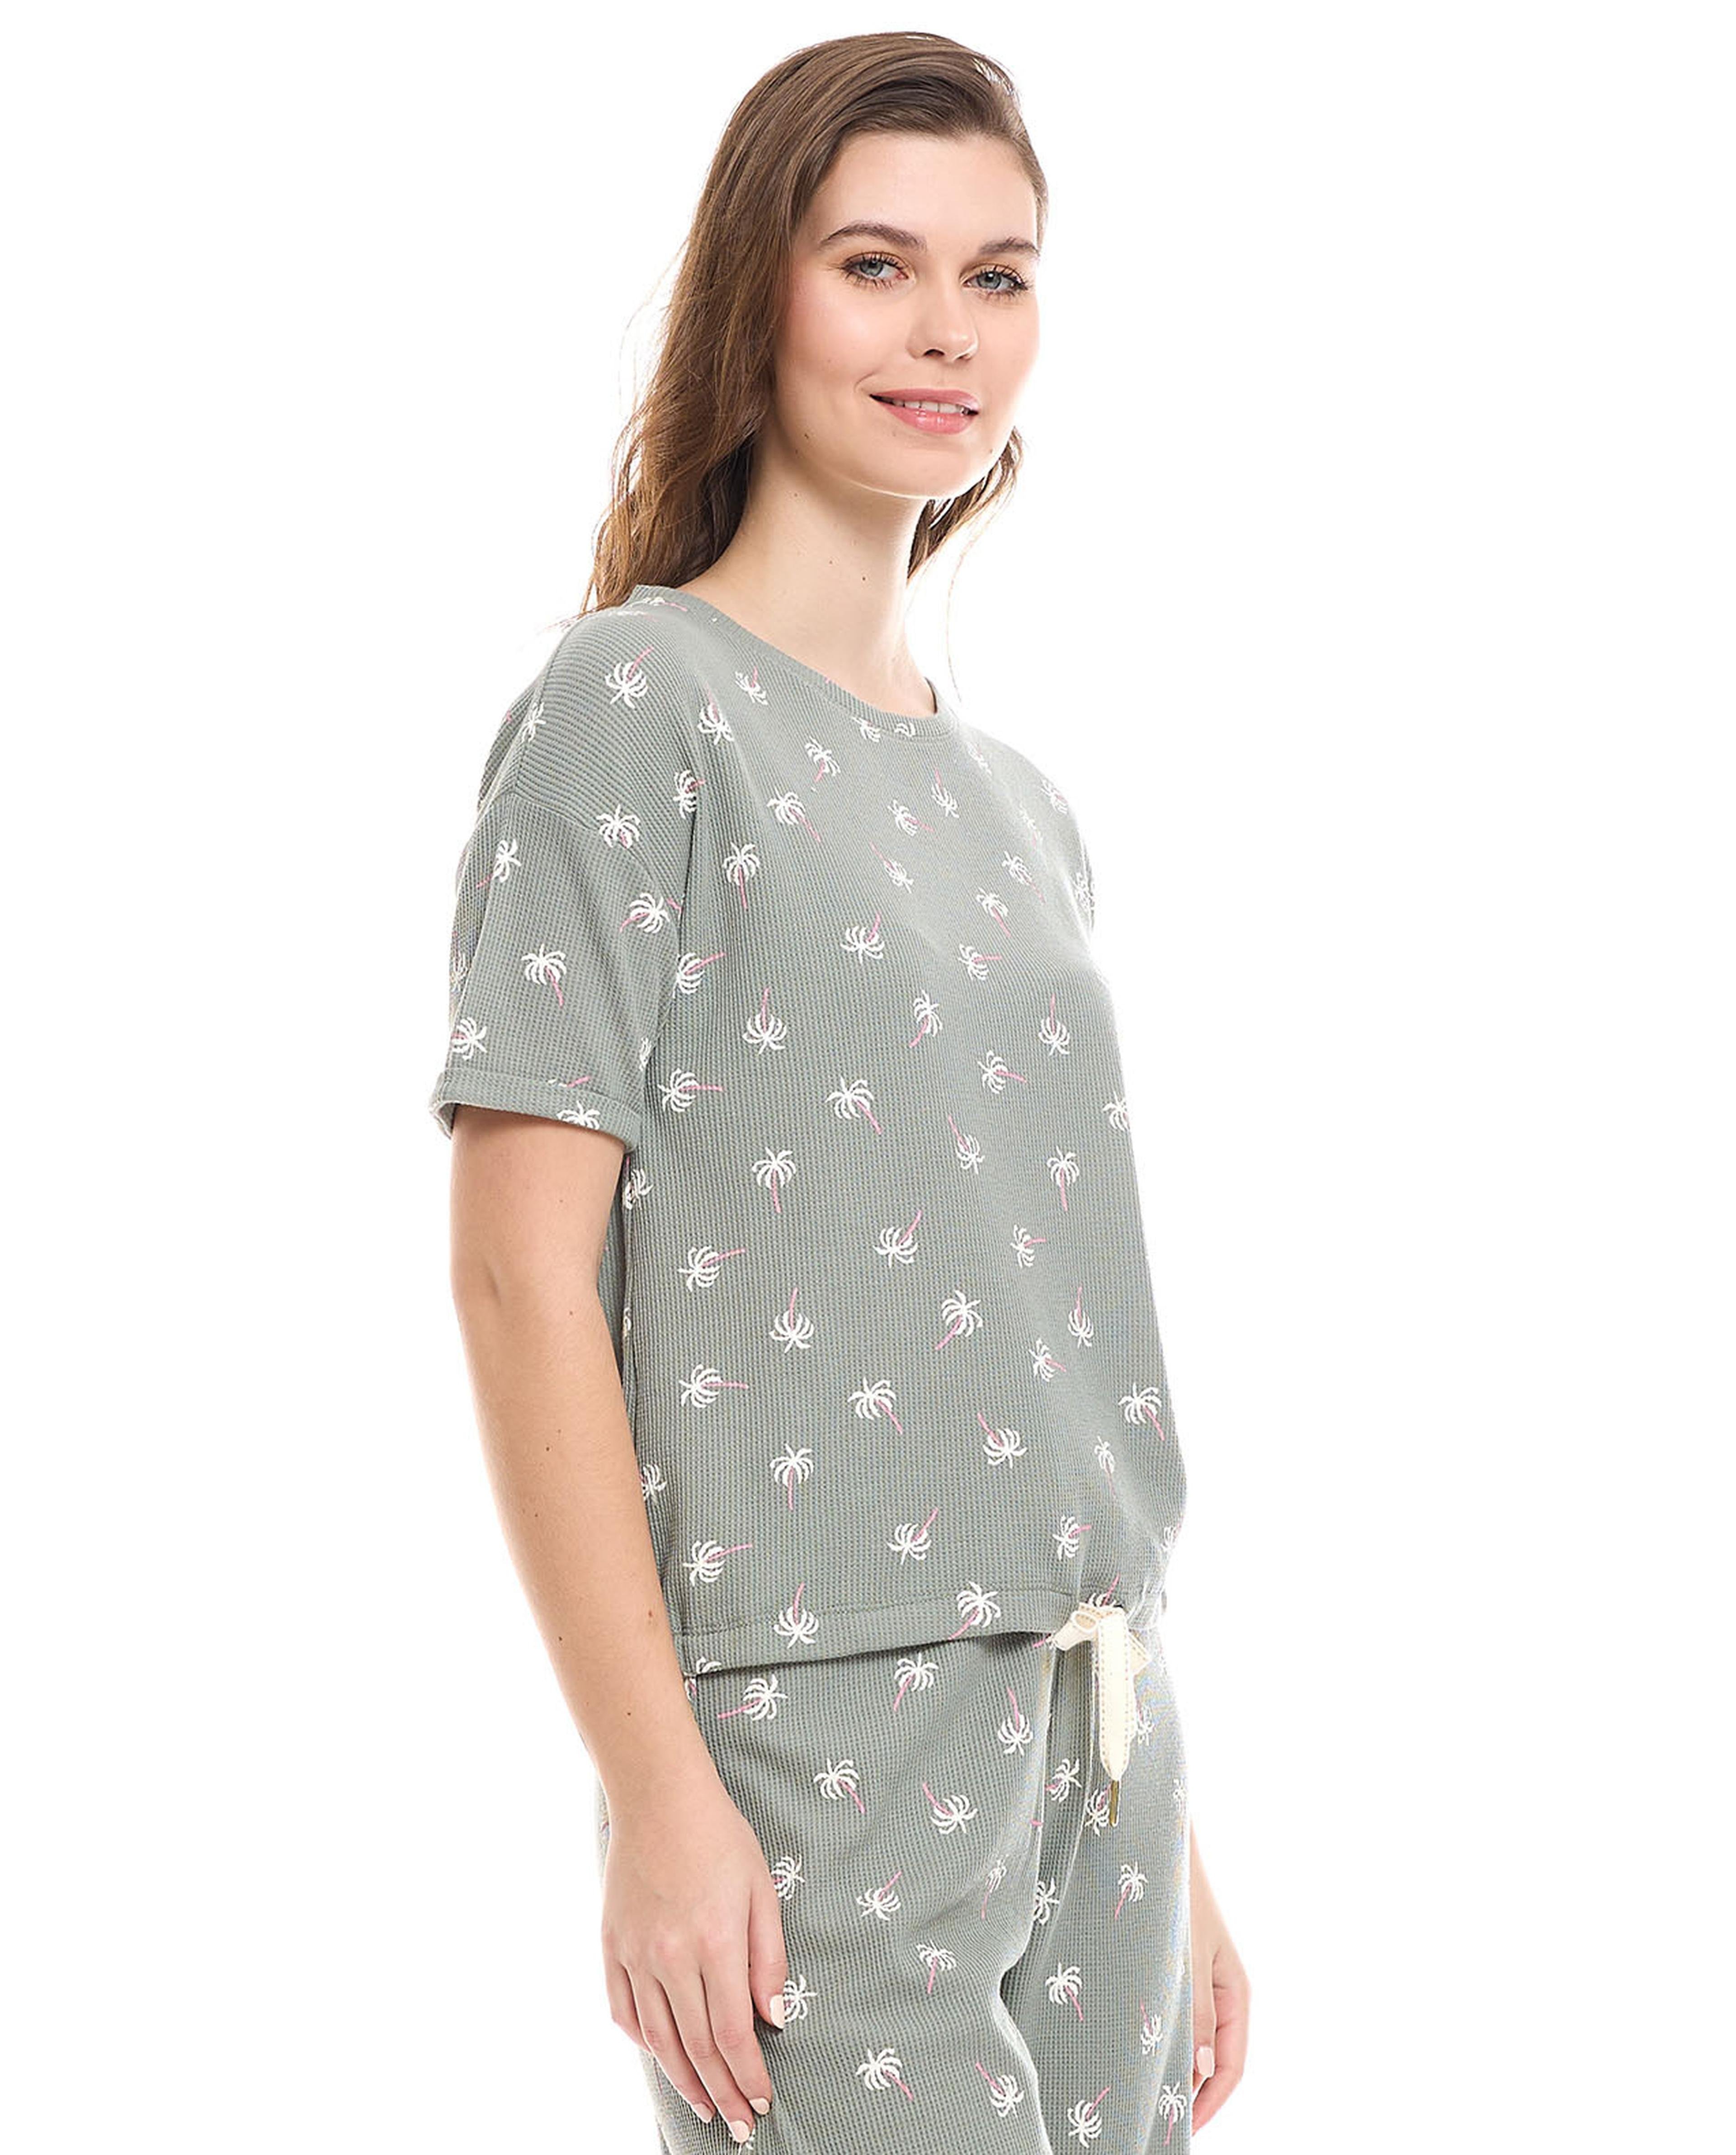 Printed Sleep Top with Crew Neck and Short Sleeves